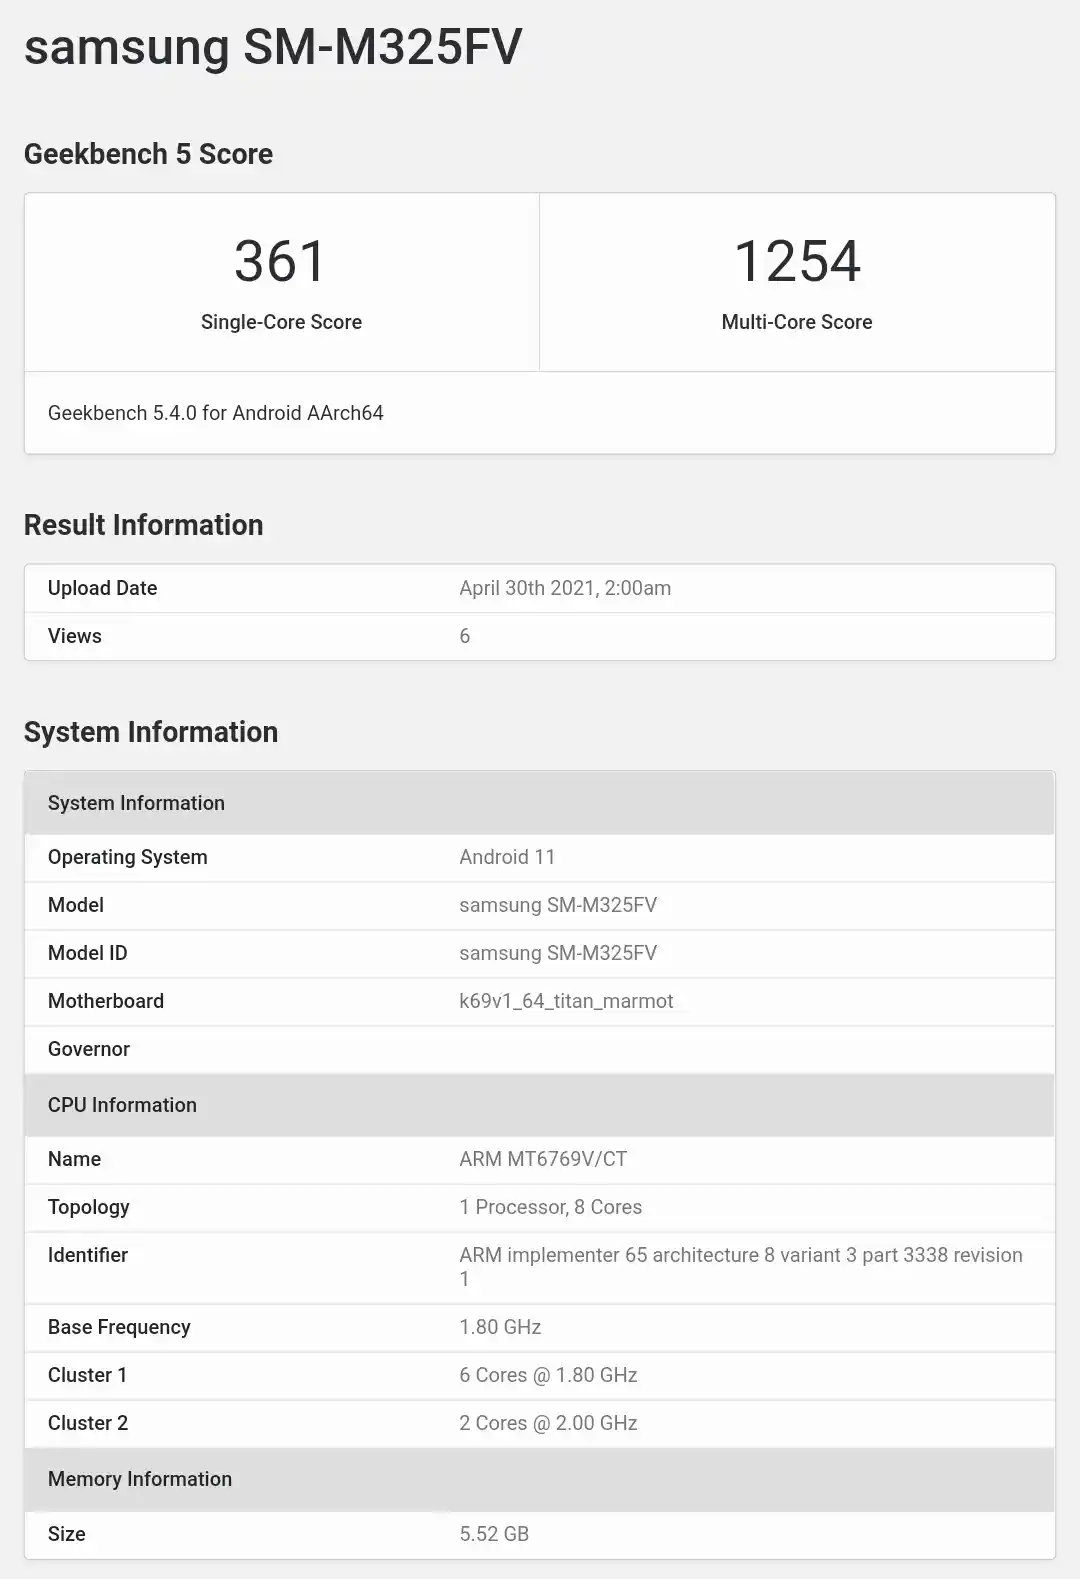 Samsung Galaxy M32 spotted on Geekbench, key specifications revealed